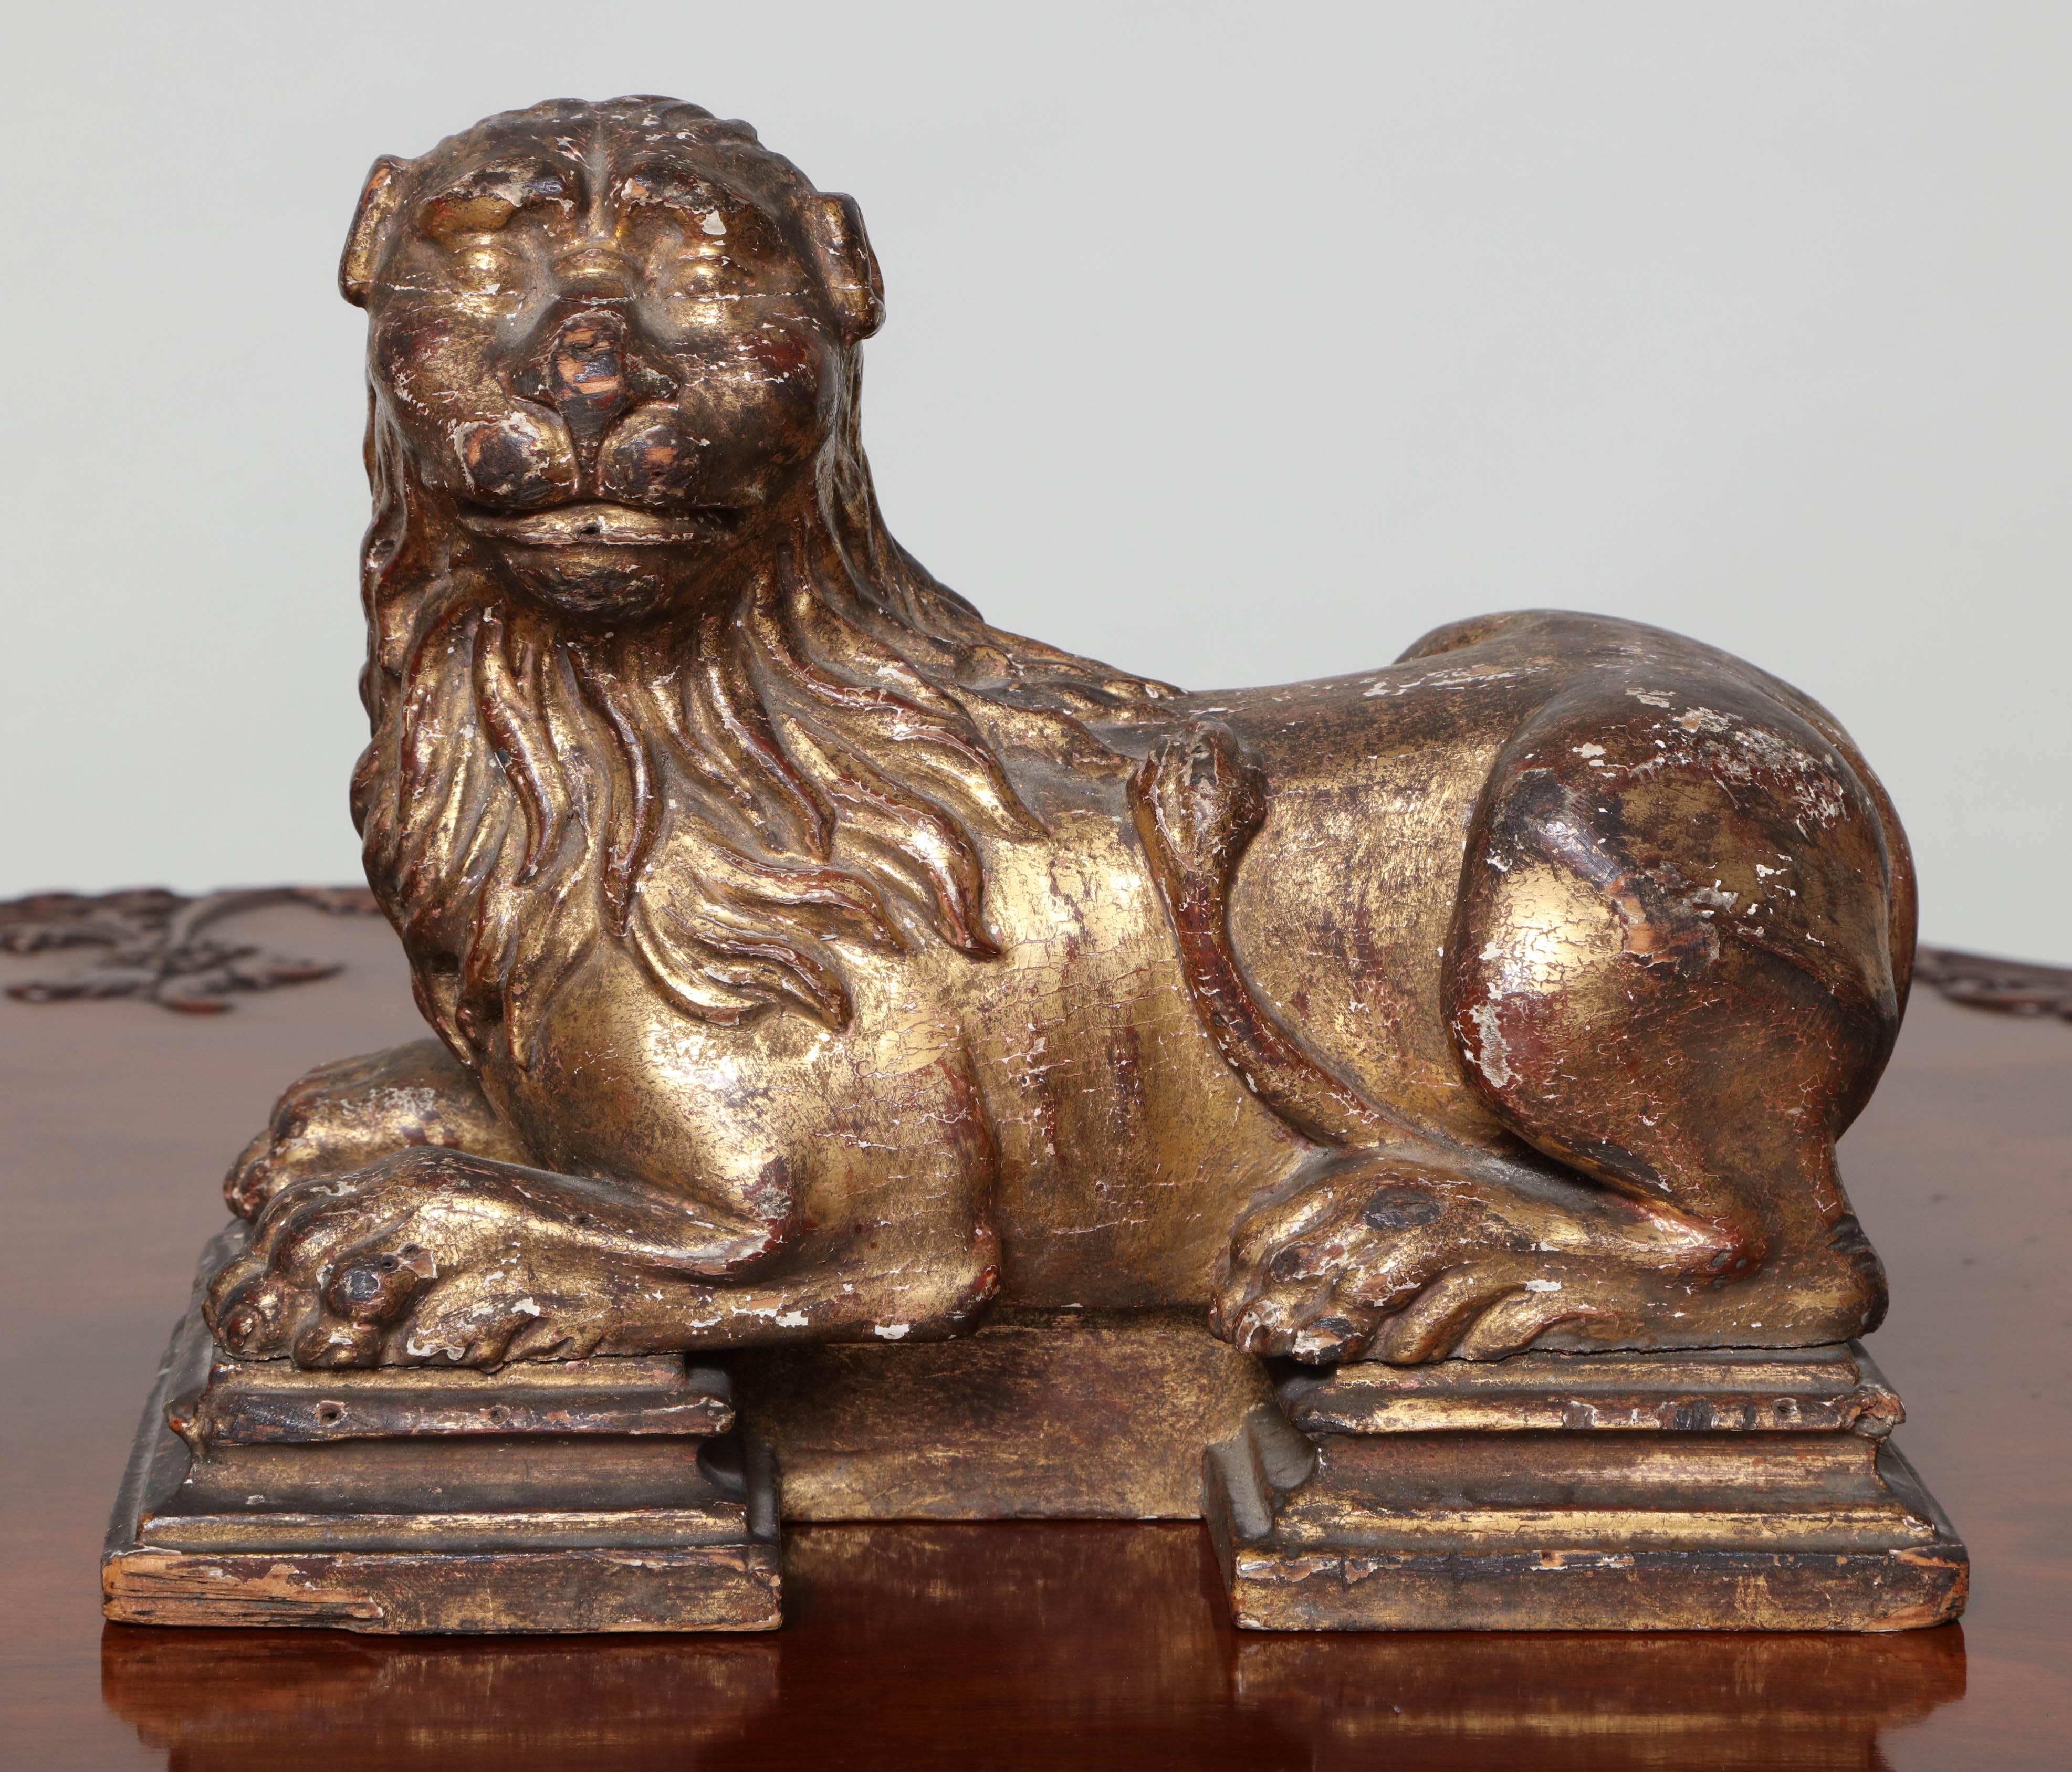 Fine Italian 17th century carved and giltwood recumbent lion on a stepped plinth vase, the whole with beautiful wear and patination. Very well carved with an expressive face.